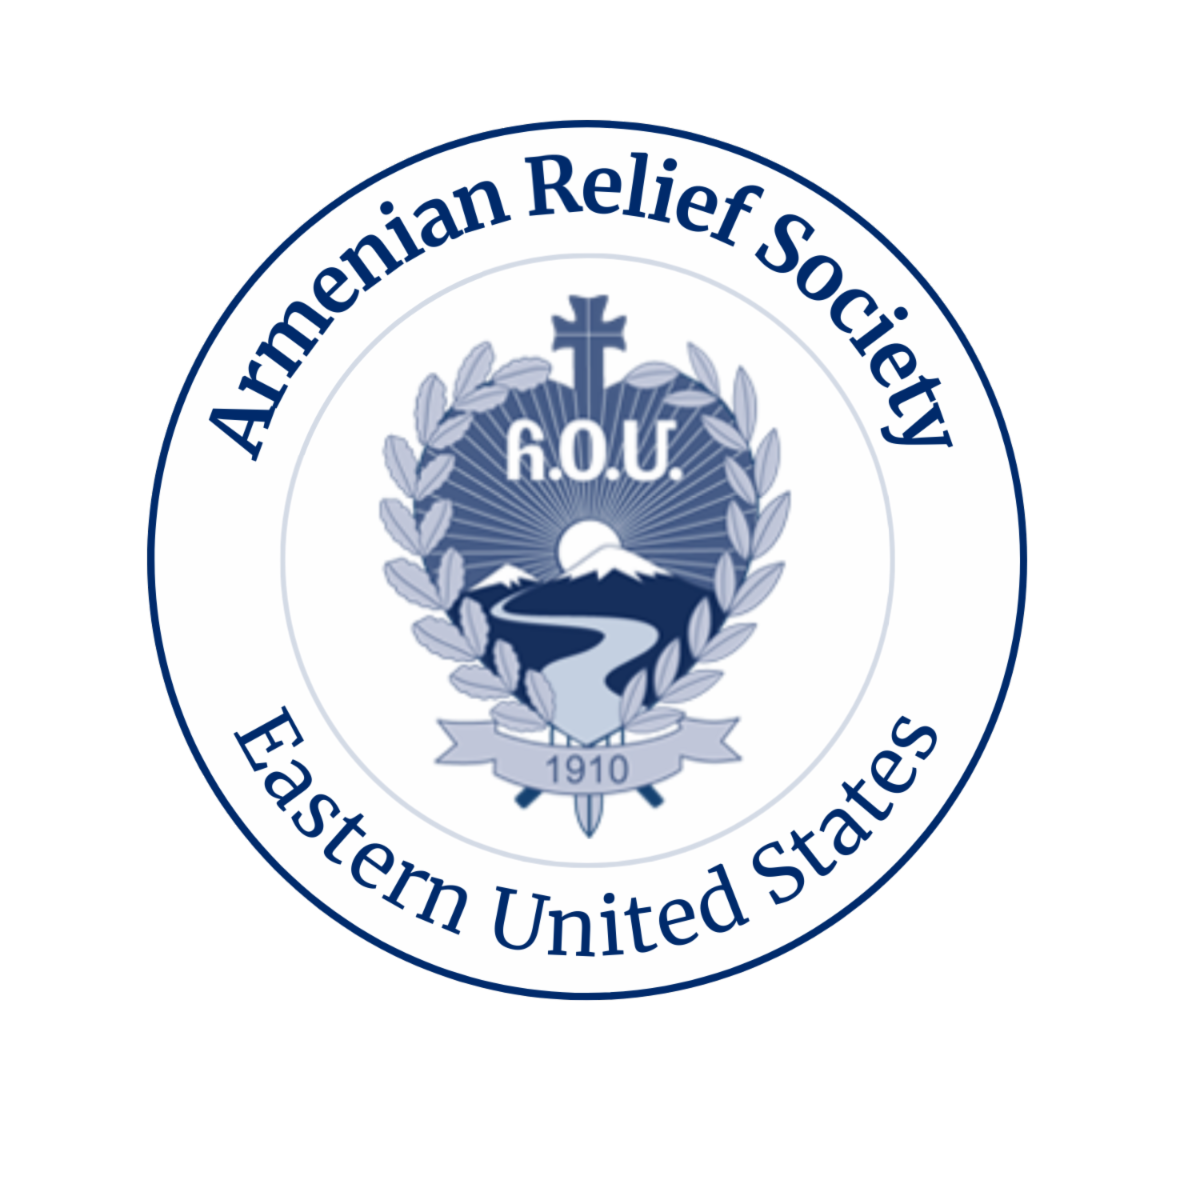 Armenian Relief Society Eastern United States